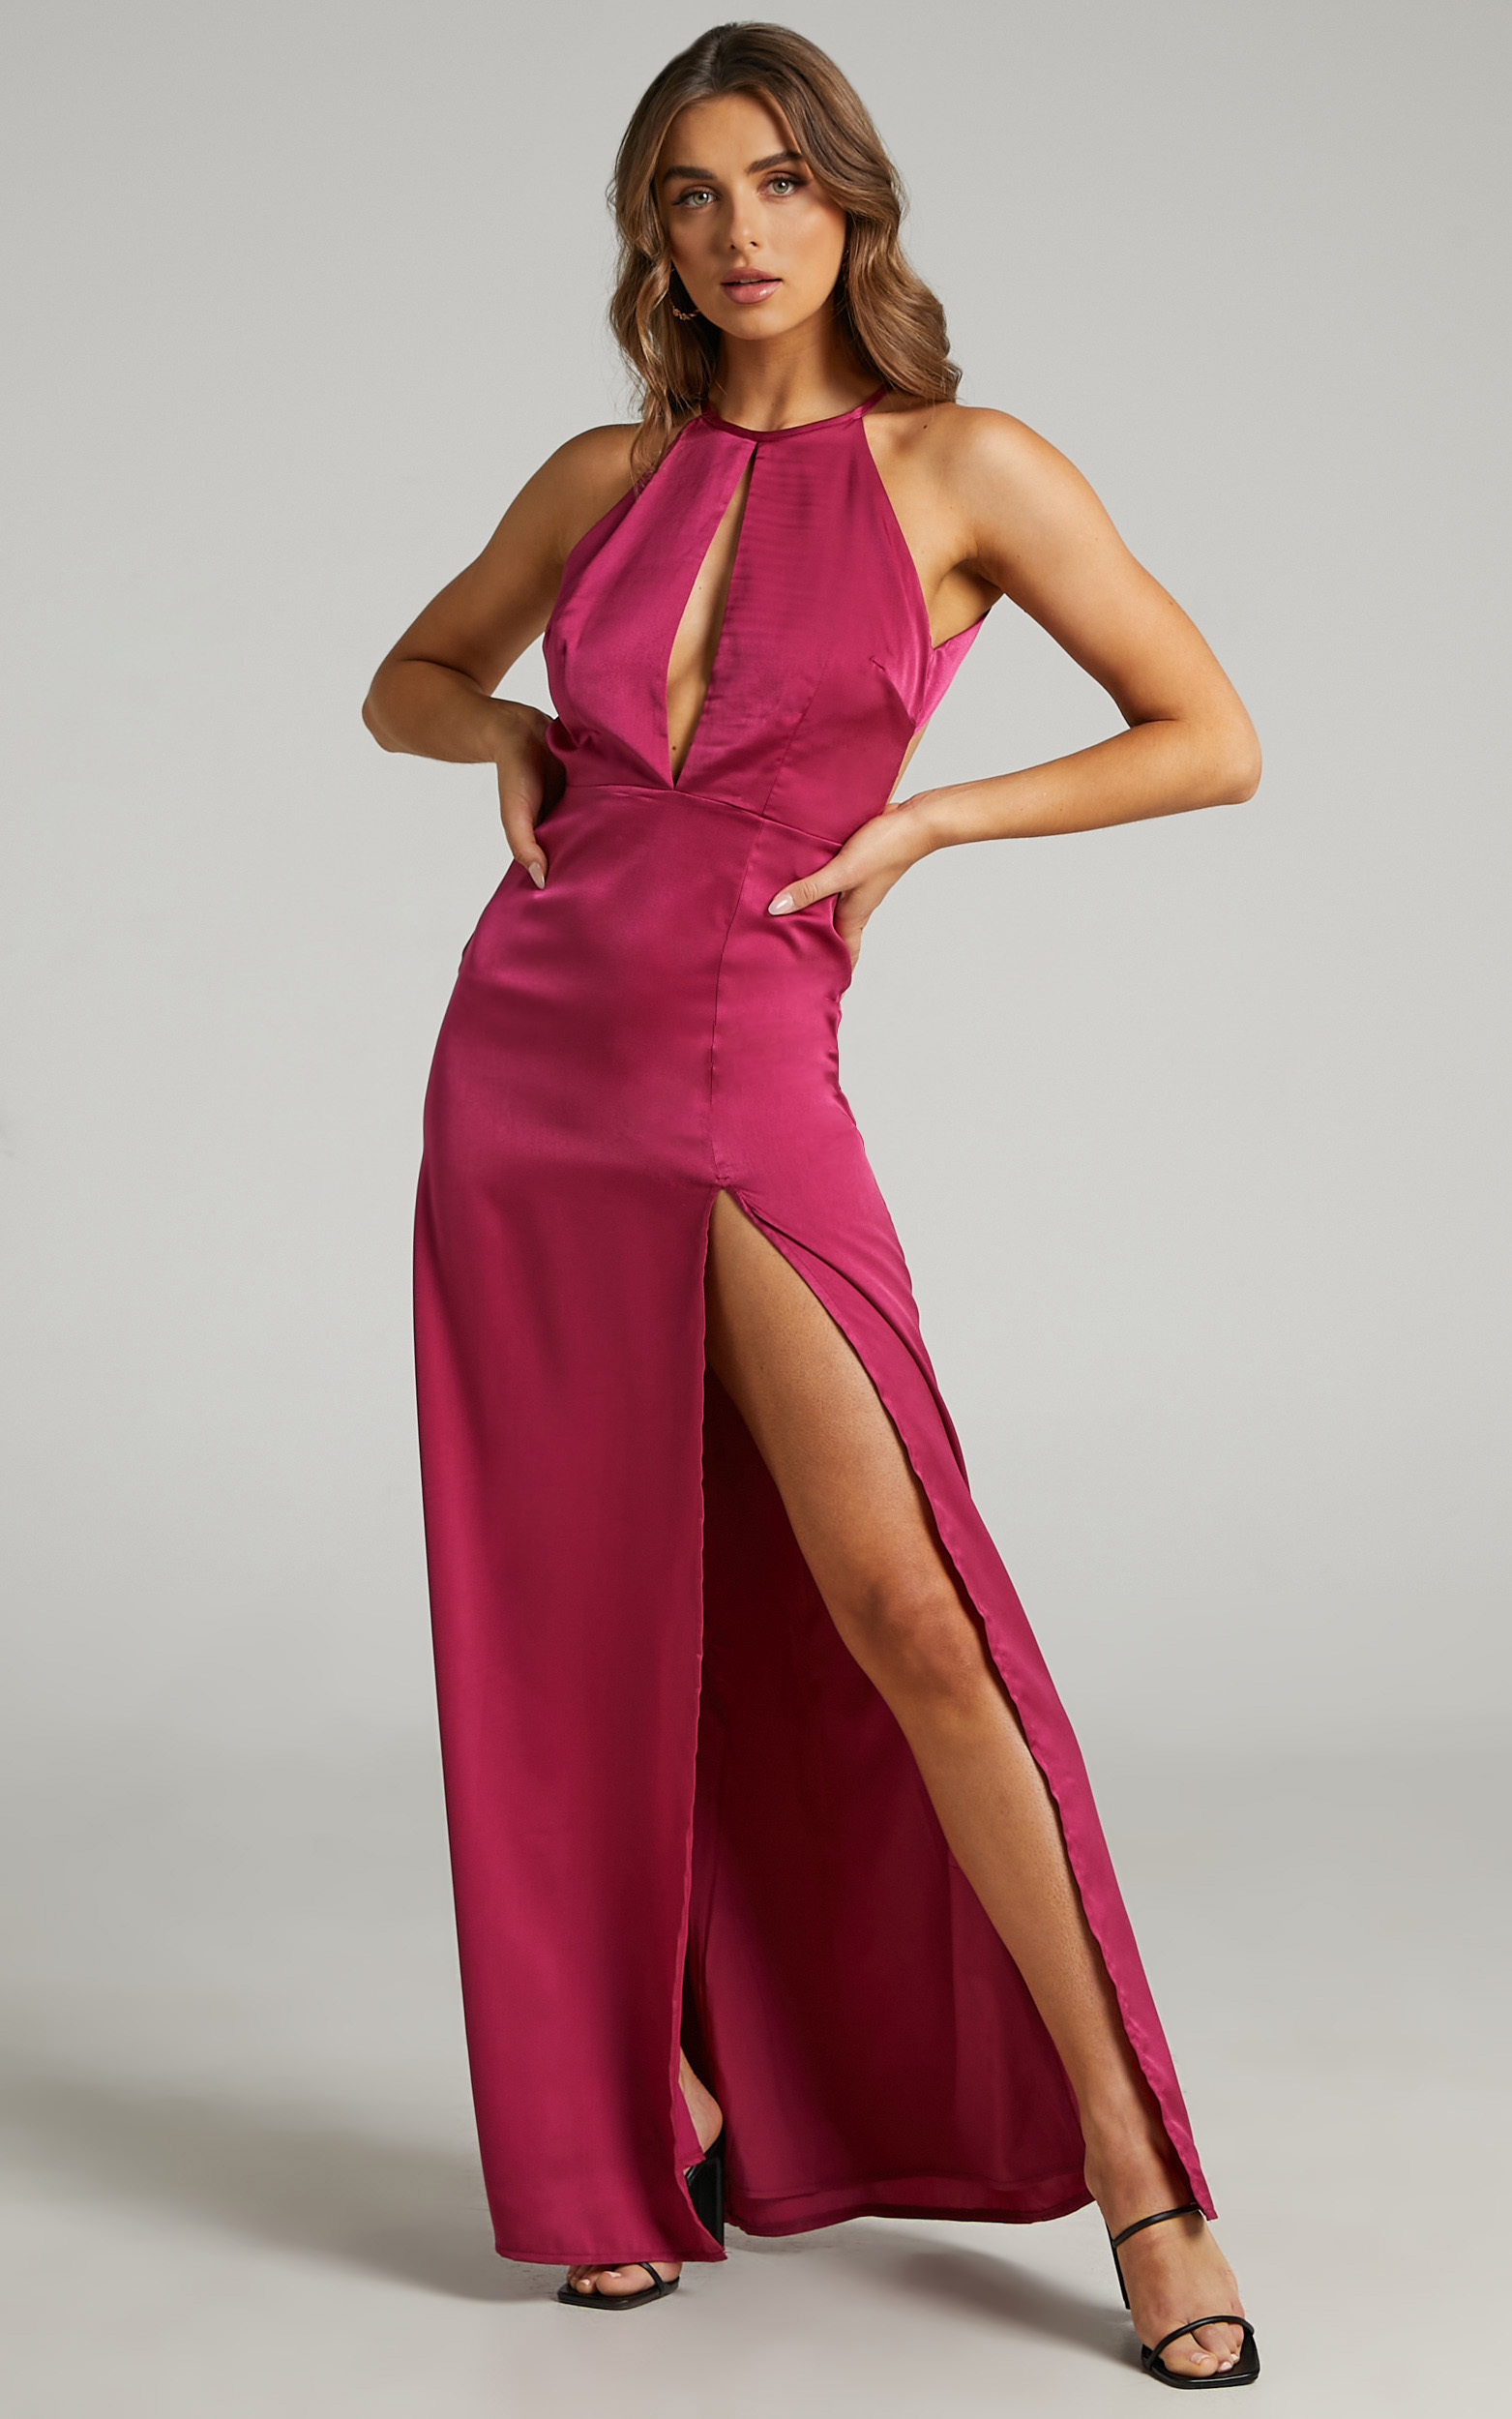 Lonni High Neck Cut Out Maxi Dress with Leg Split in Berry Satin - 06, PNK1, hi-res image number null